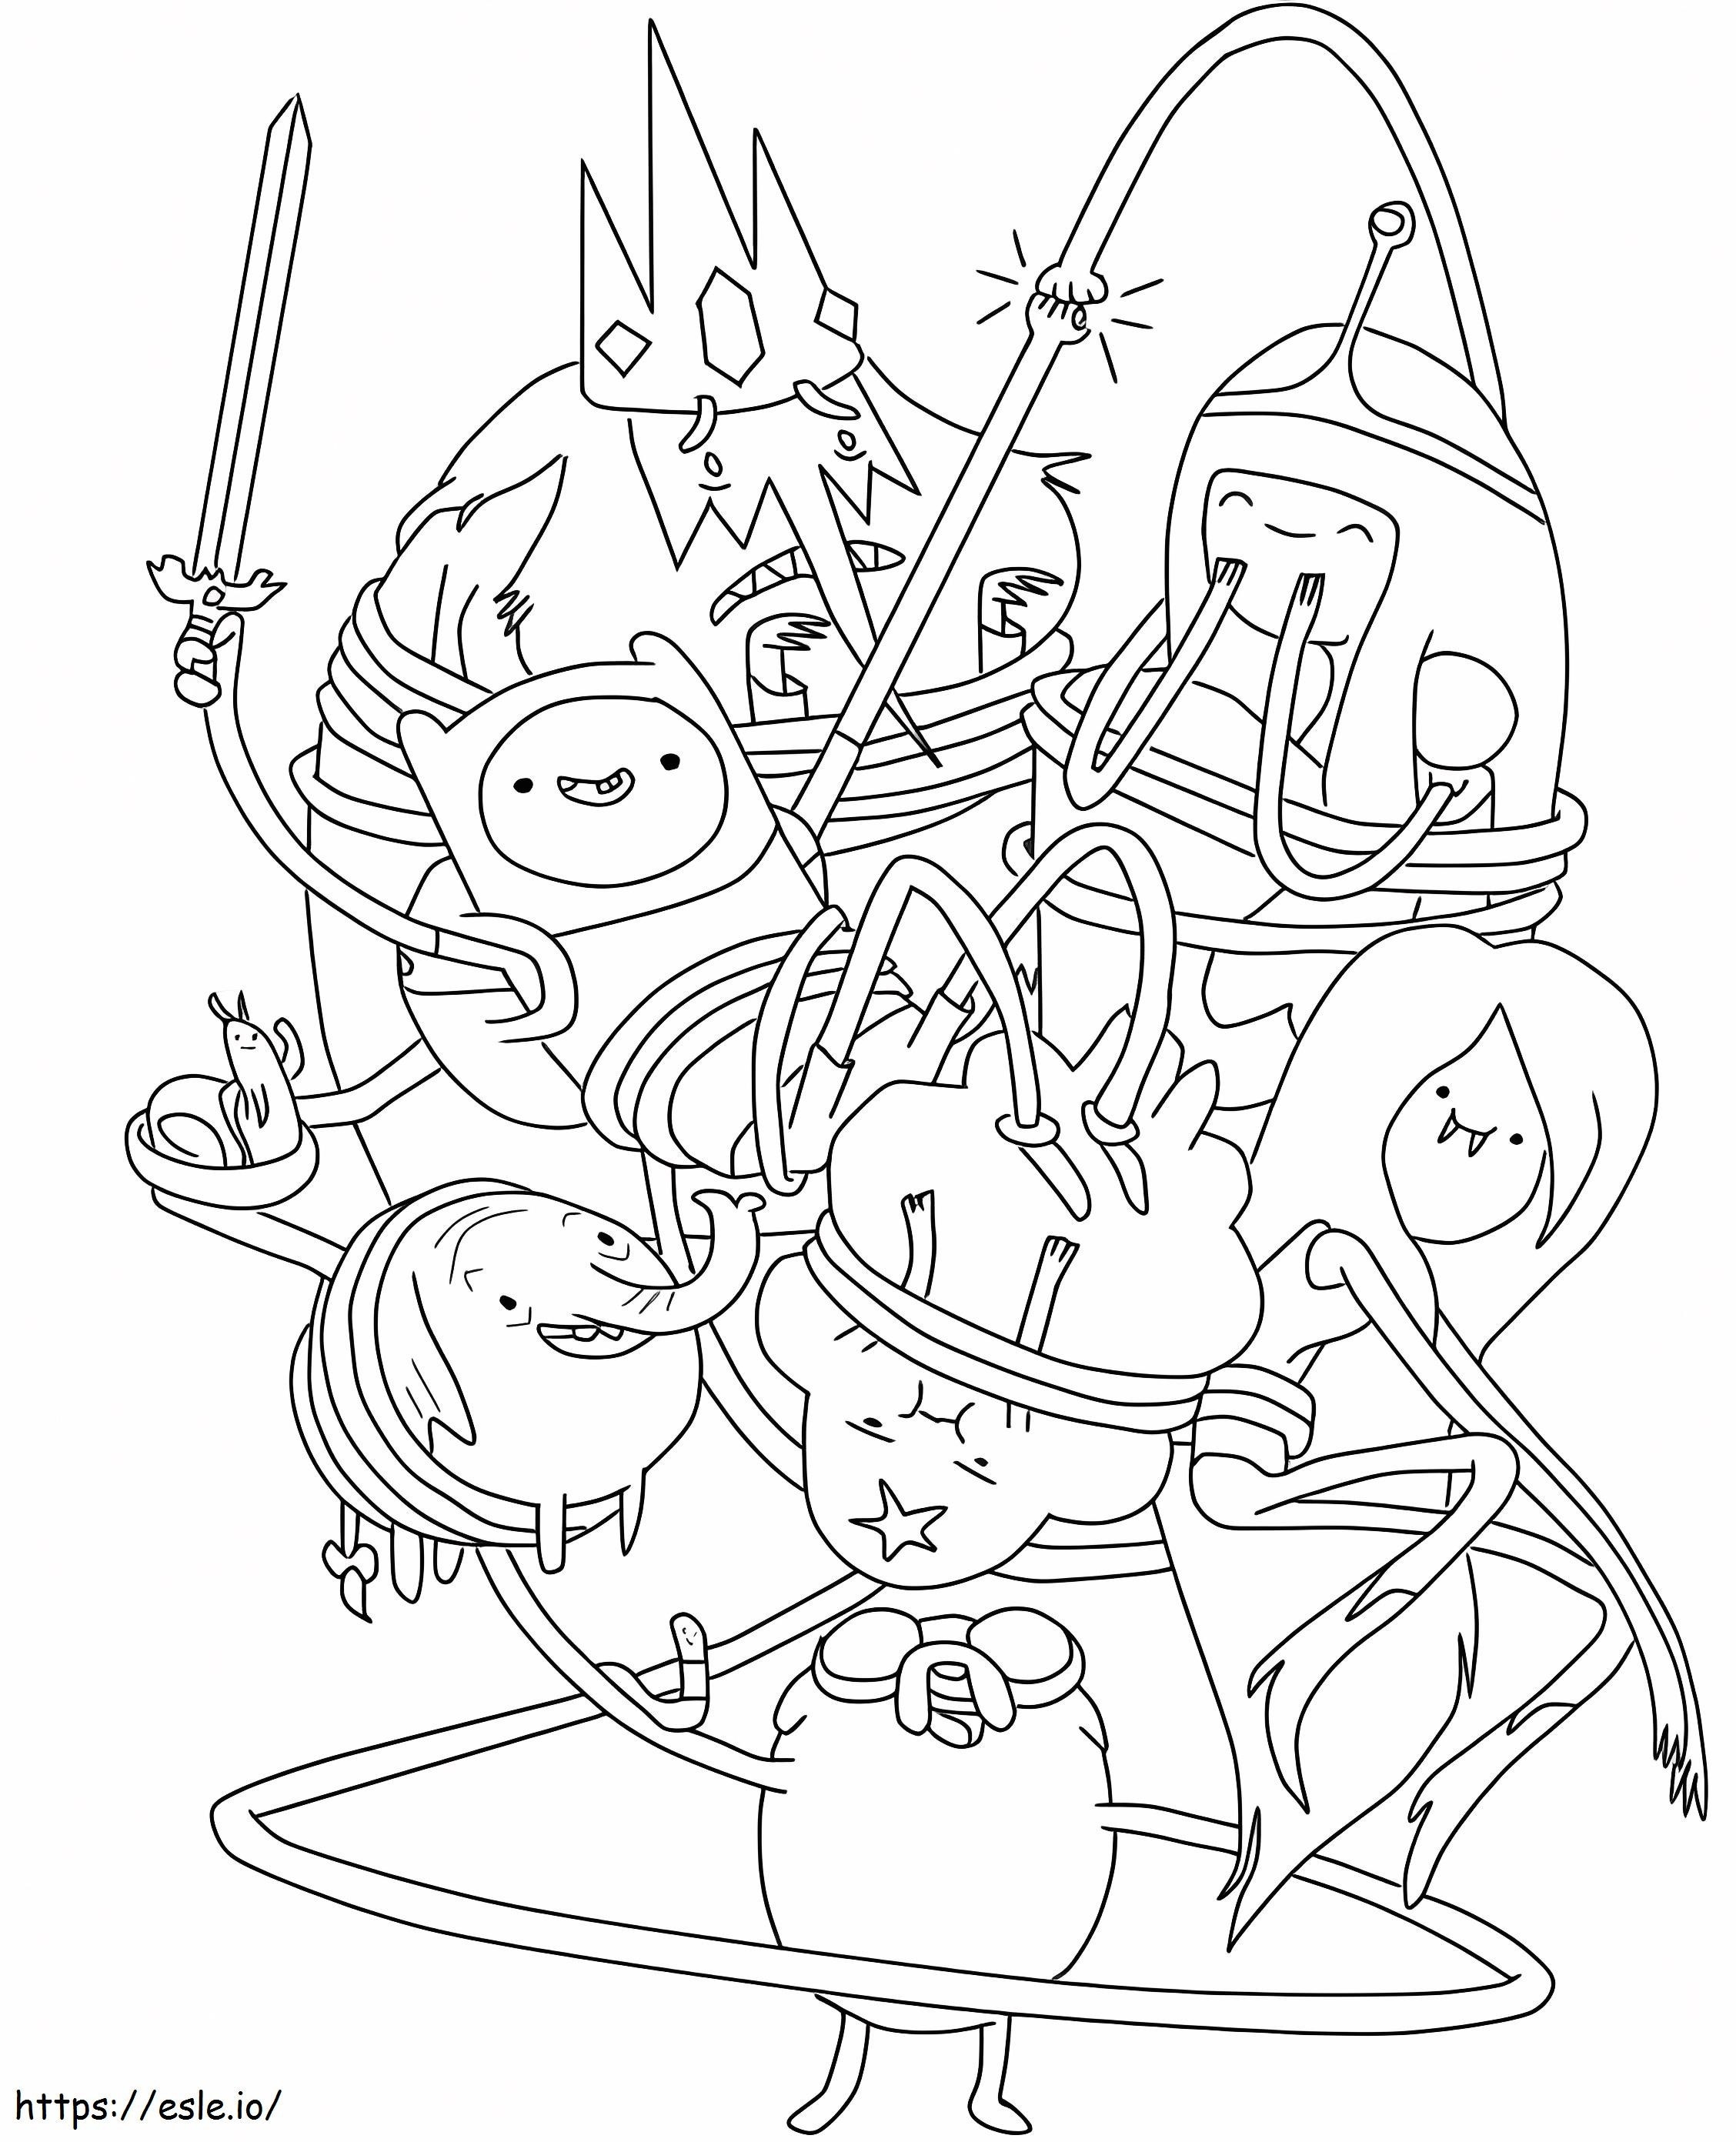 Normal Adventure Time Characters coloring page